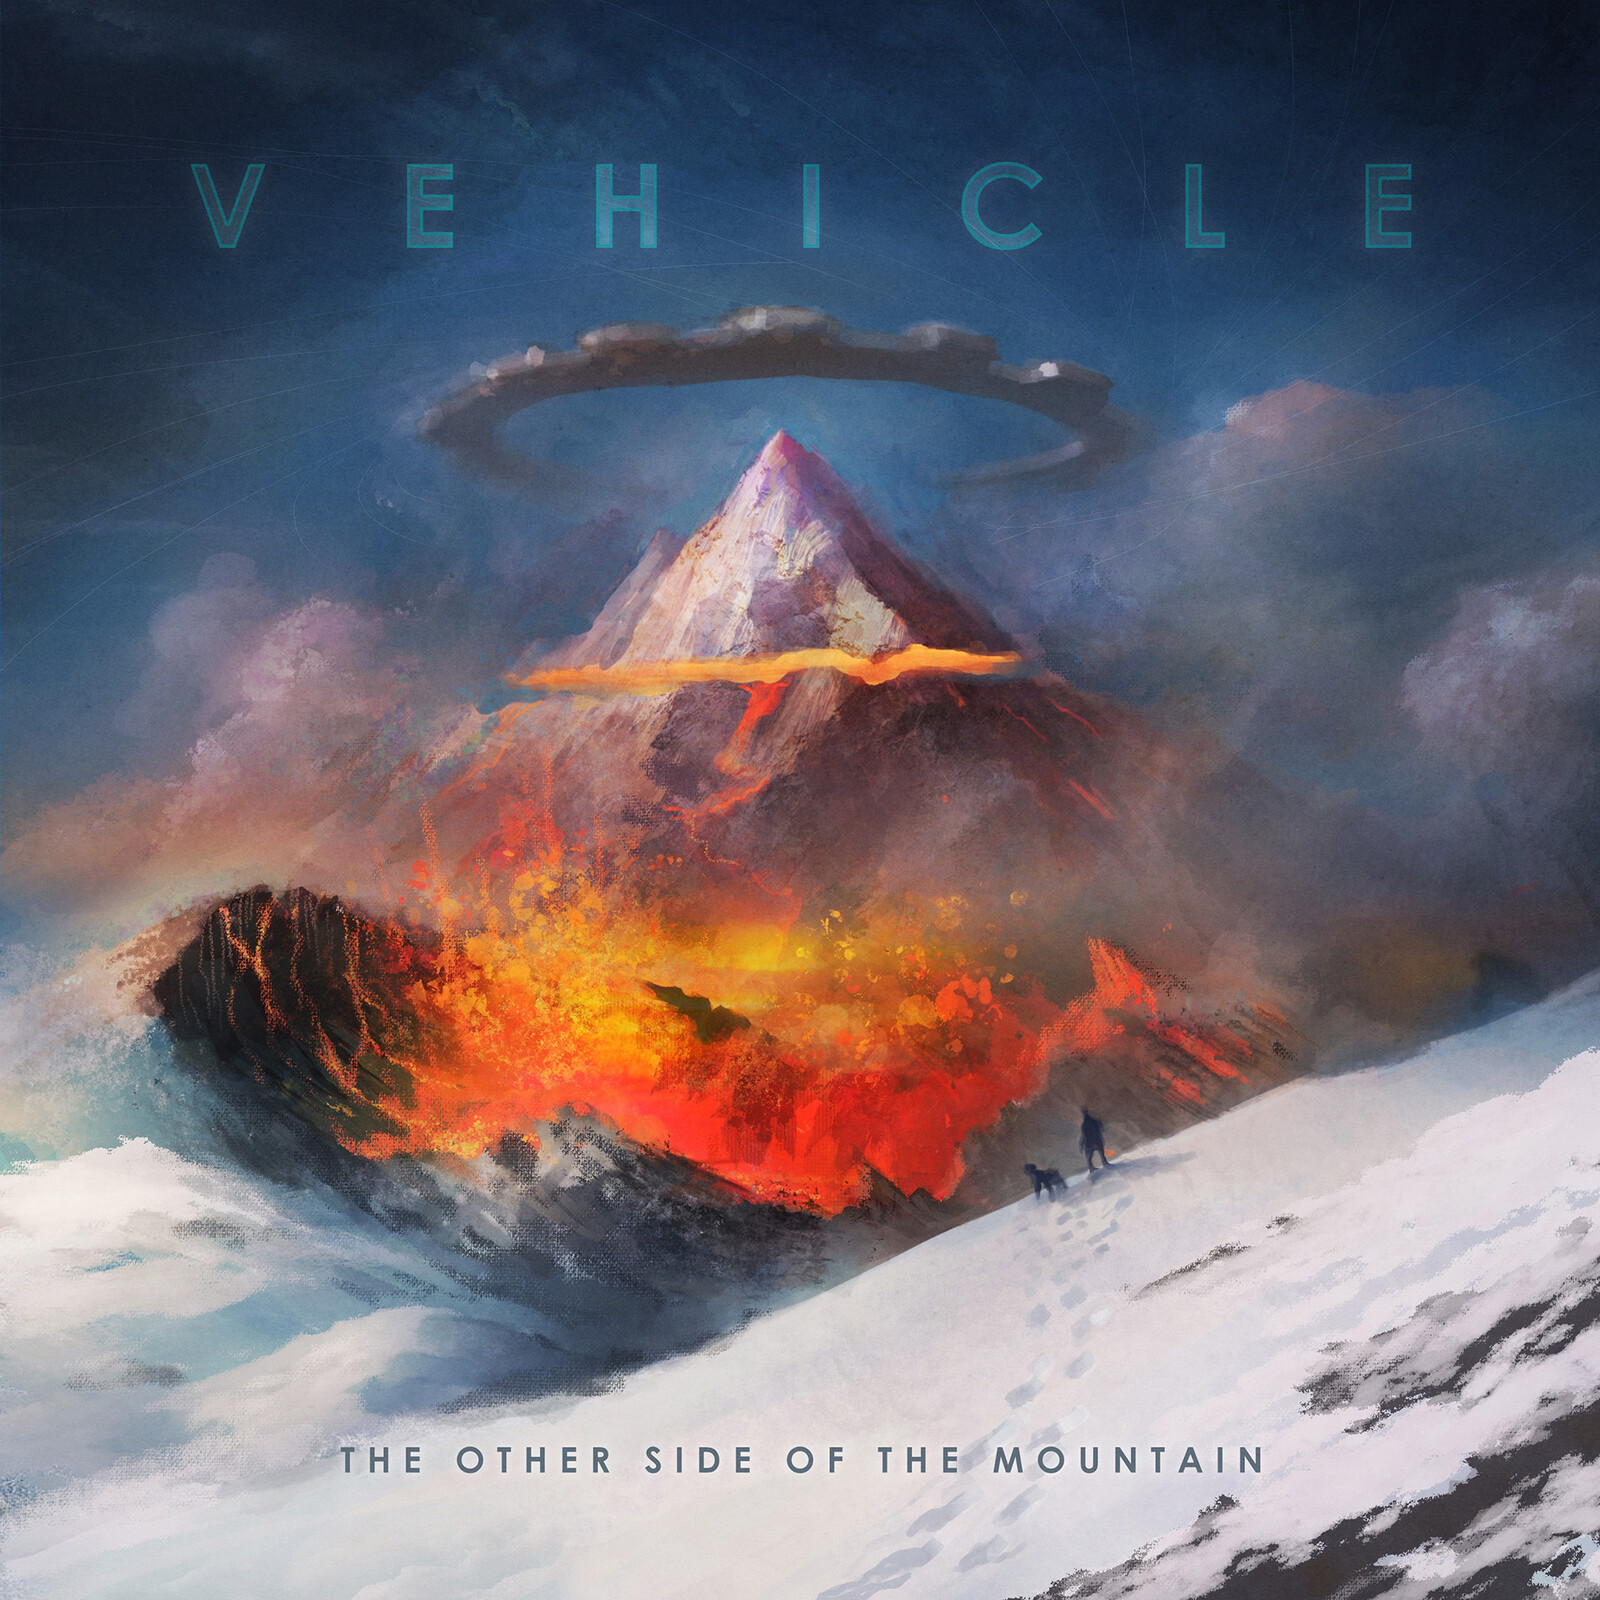 Cover Art for an album by Vehicle.